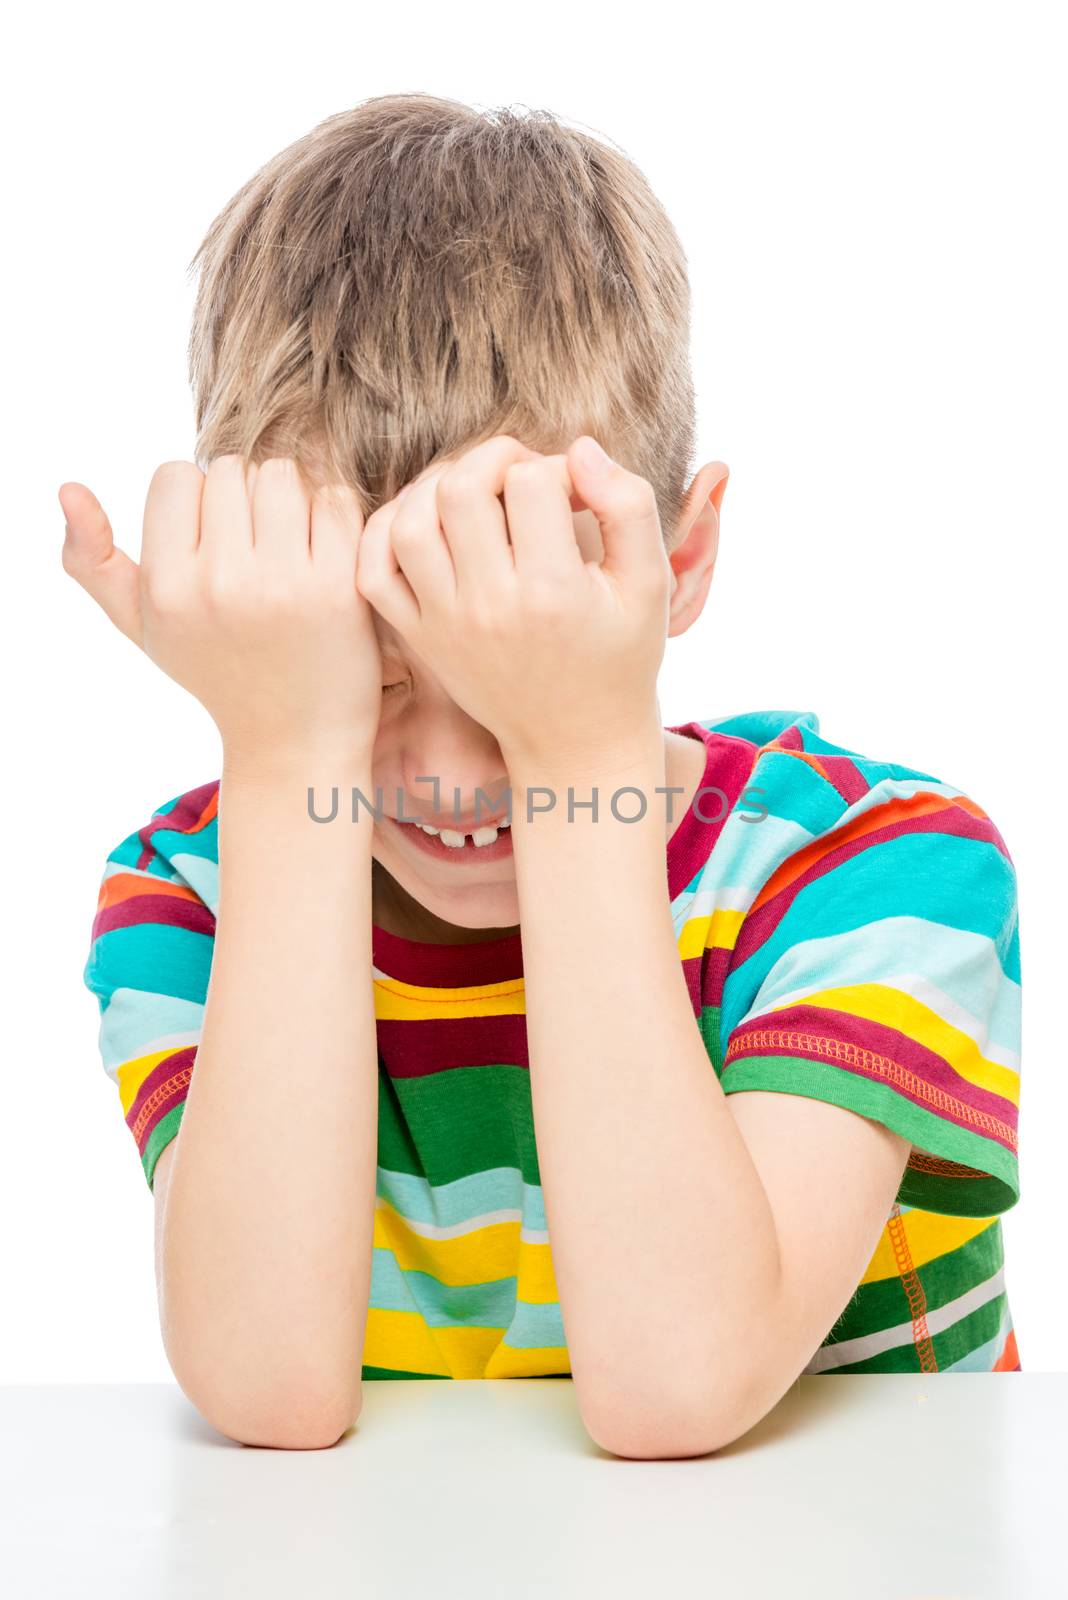 emotional portrait of a 10 years old boy at the table on a white background isolated